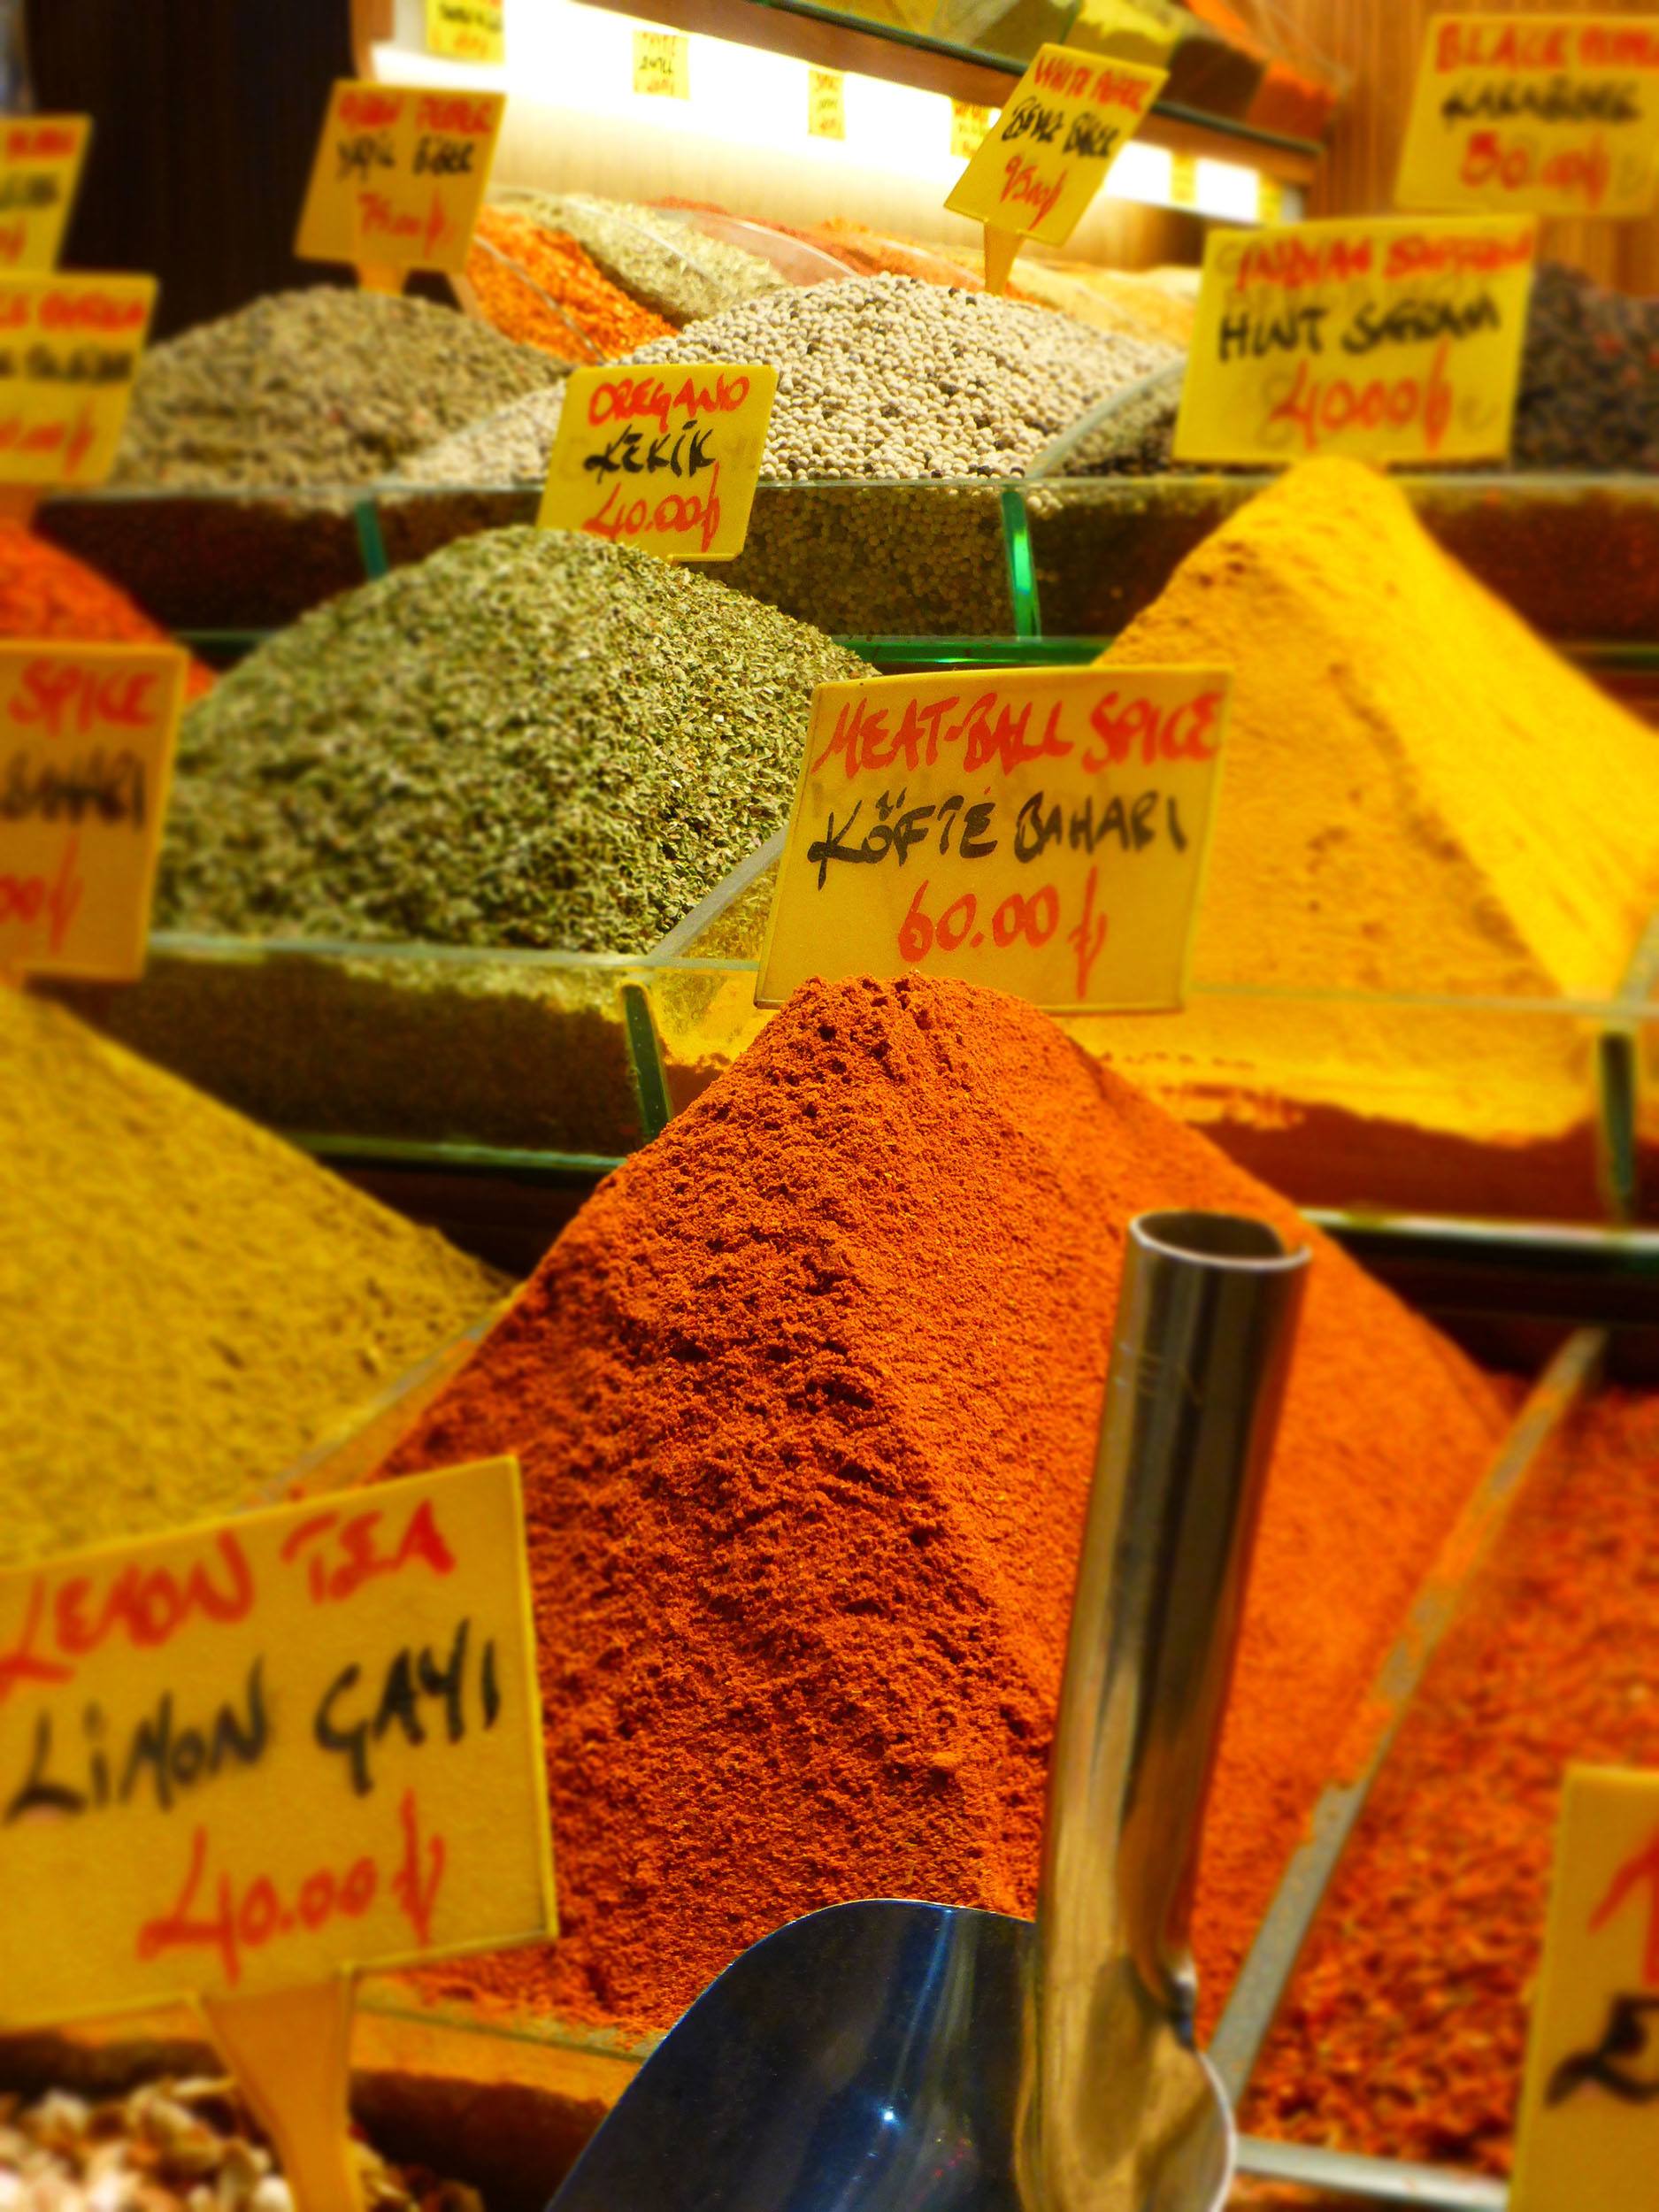 Heaped spices in a store within the Grand Bazaar in Istanbul Turkey